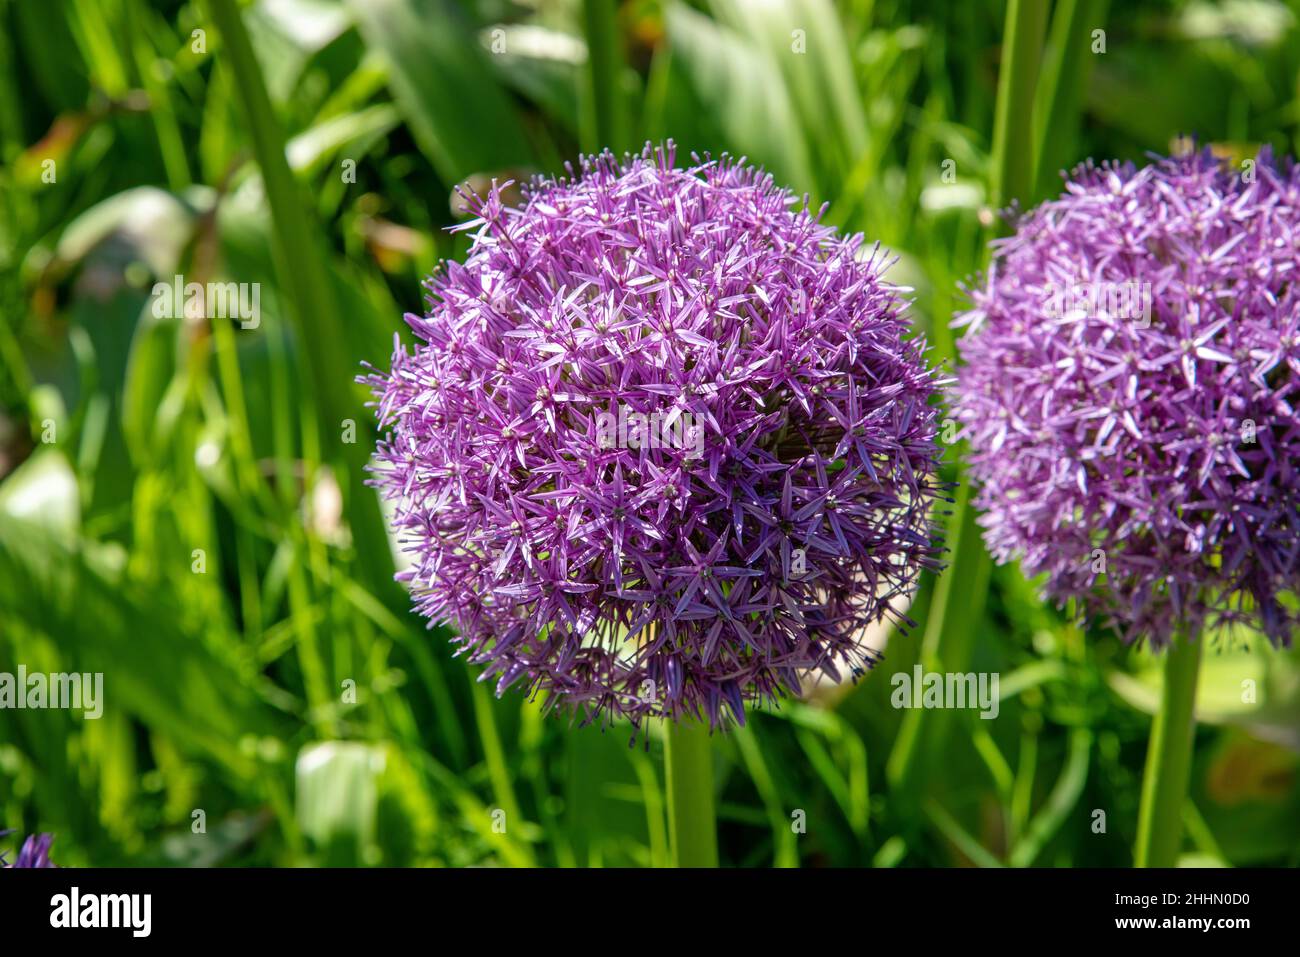 Close up on the colorful purple round pompom flowers of an Allium plant growing outdoors in a spring garden against greenery Stock Photo